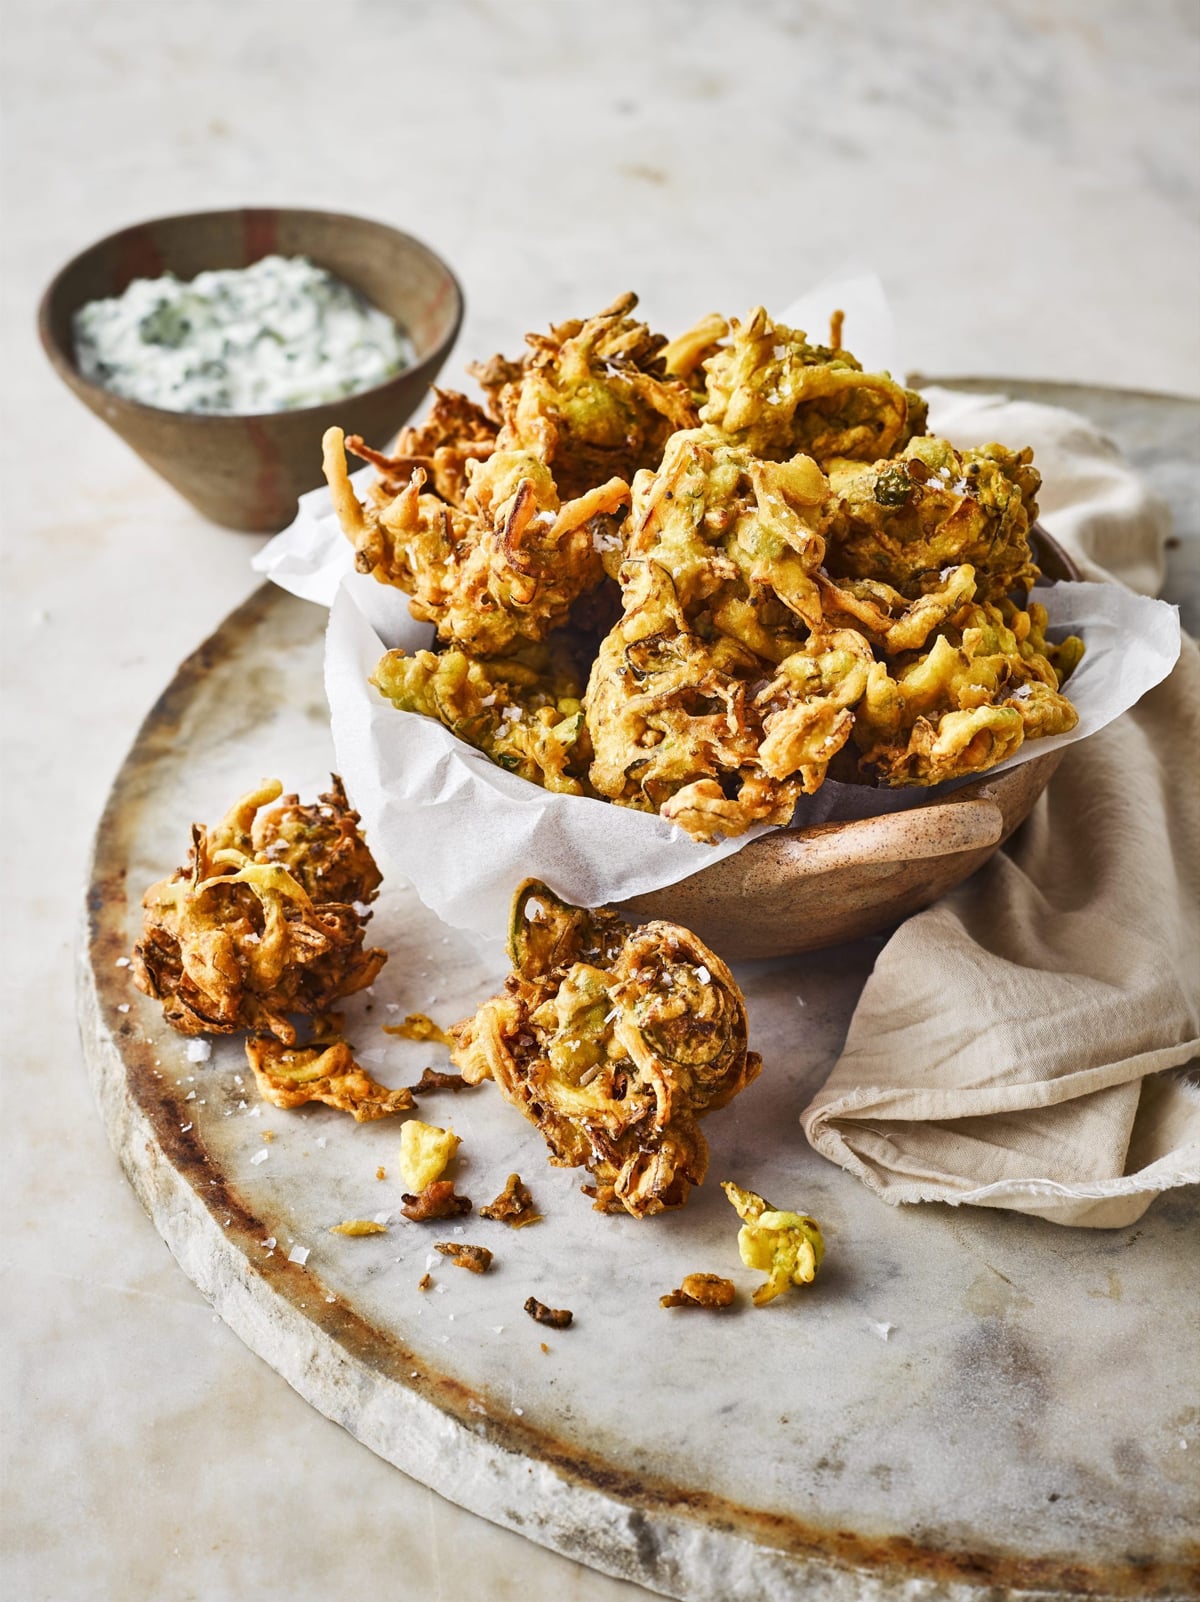 Brussels sprouts bhajis with raita